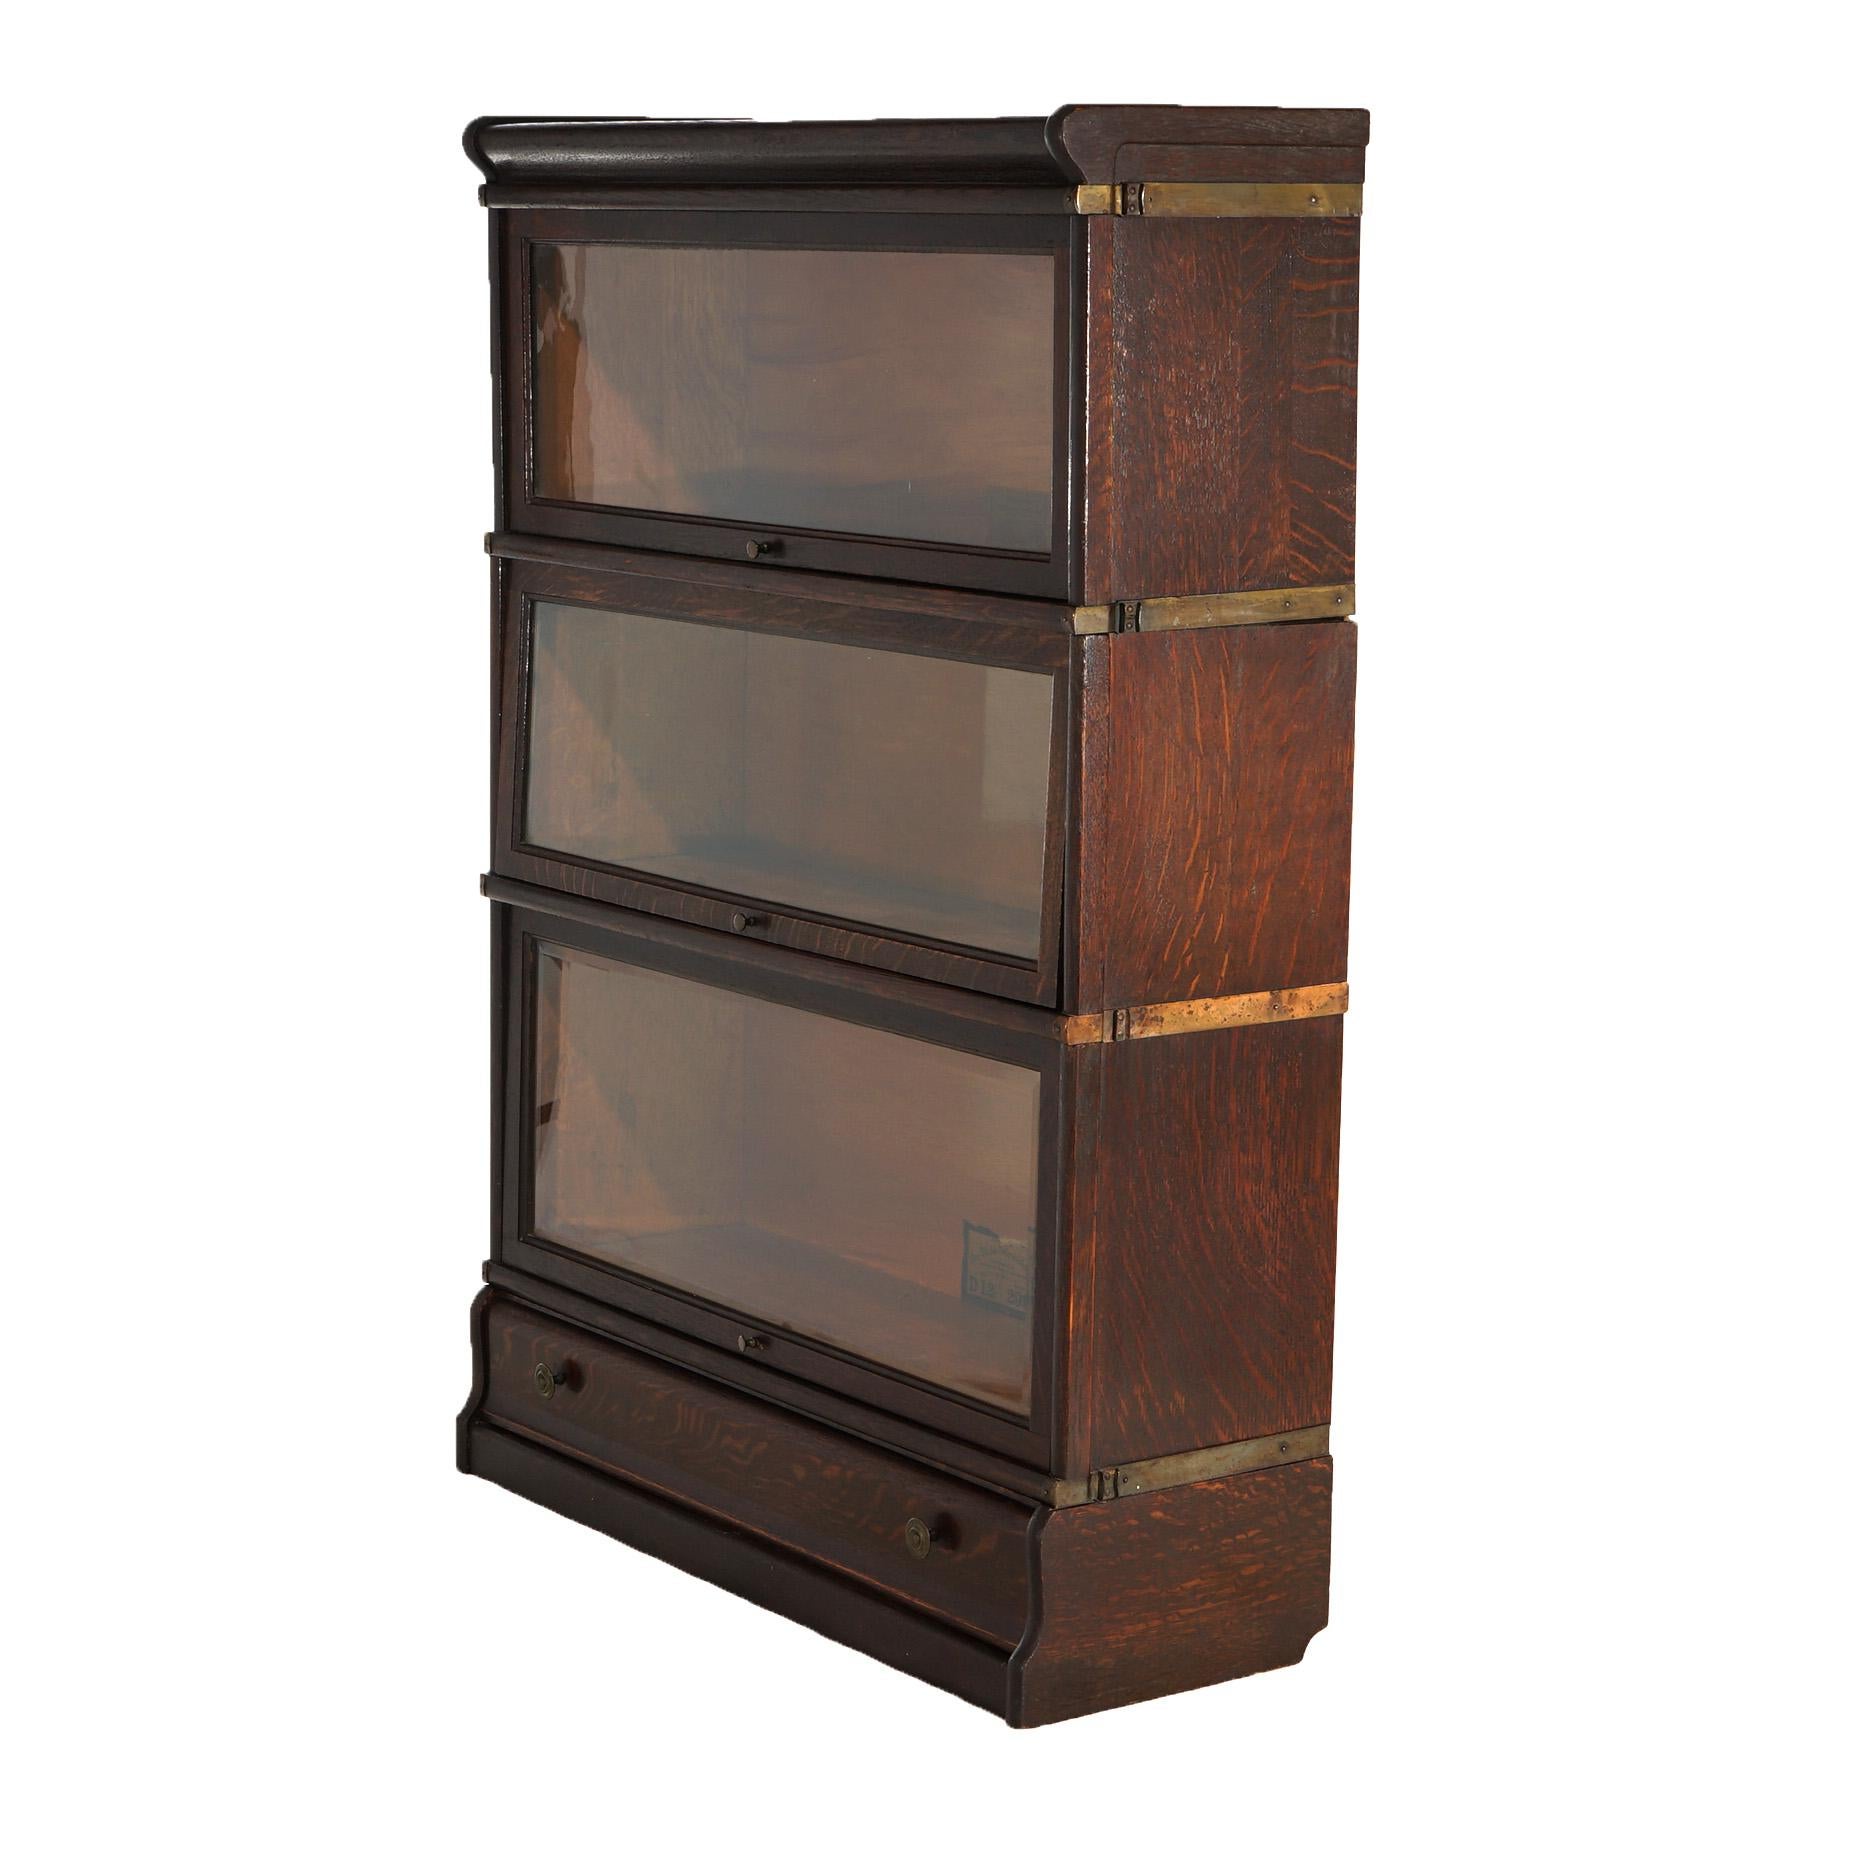 An antique Arts and Crafts barrister bookcase by Globe Wernicke offers oak construction with three pull-out glass doors, raised on an ogee base having a single long drawer; maker labels as photographed; c1910

Measures - 49